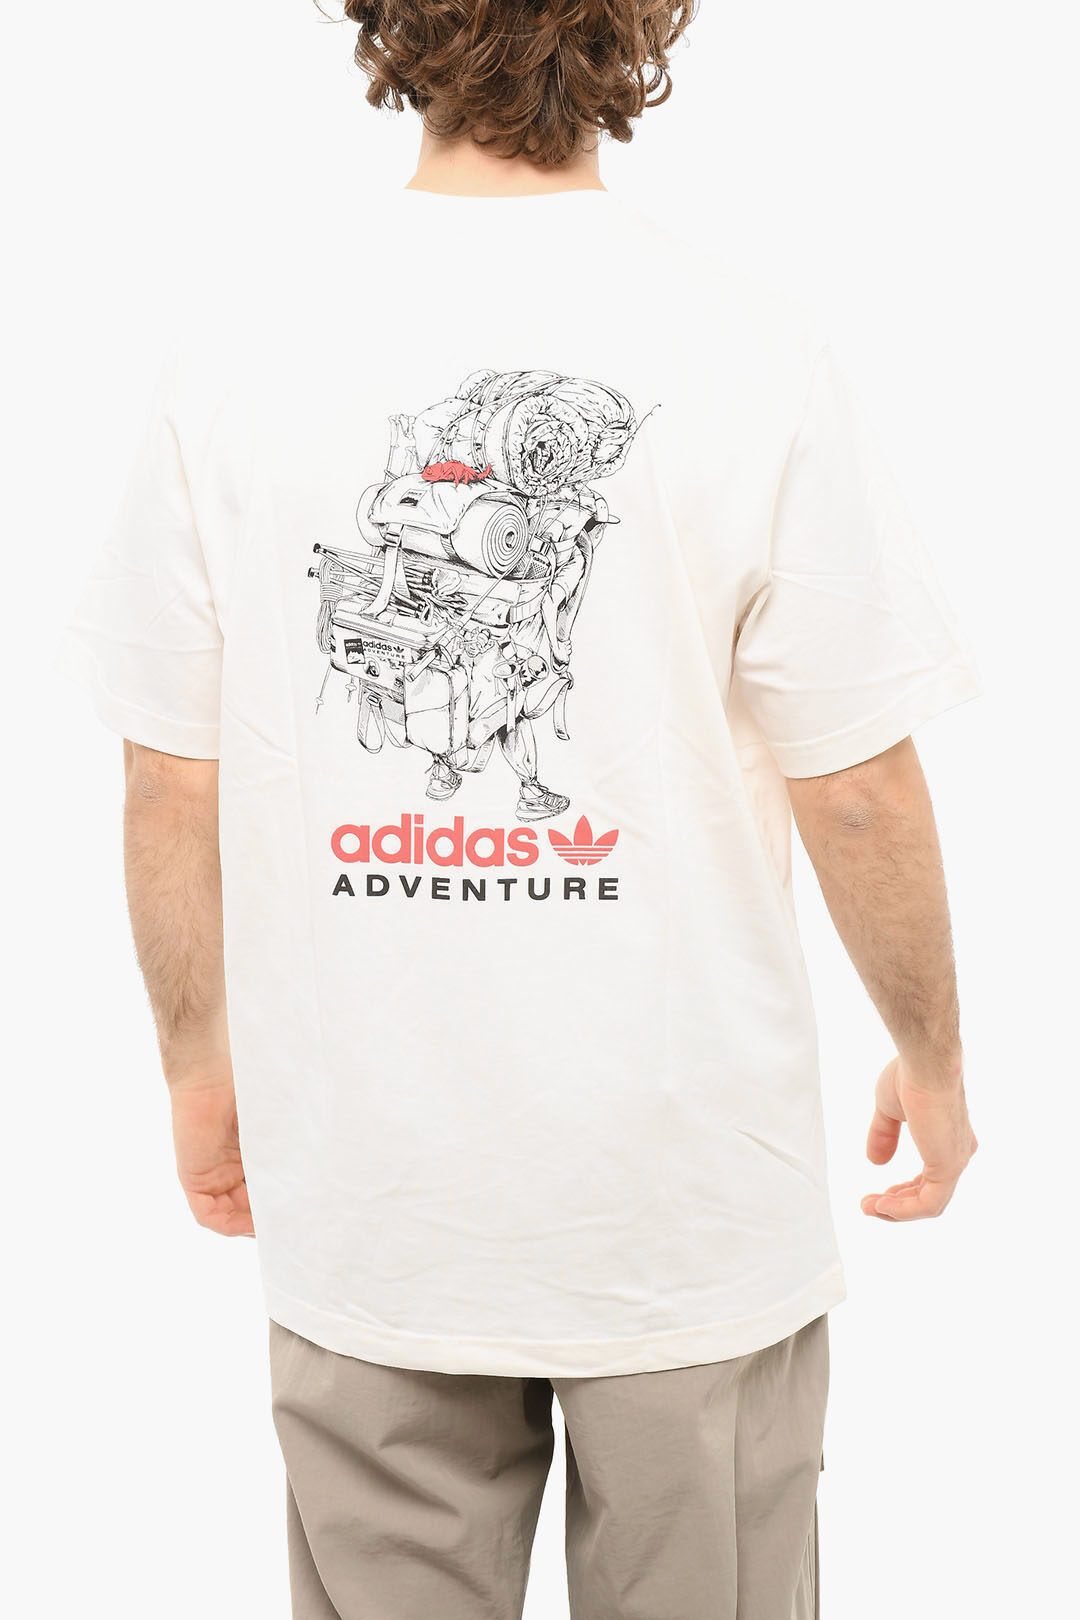 Adidas ADVENTURE Crewneck T-shirt with Embossed Lettering men